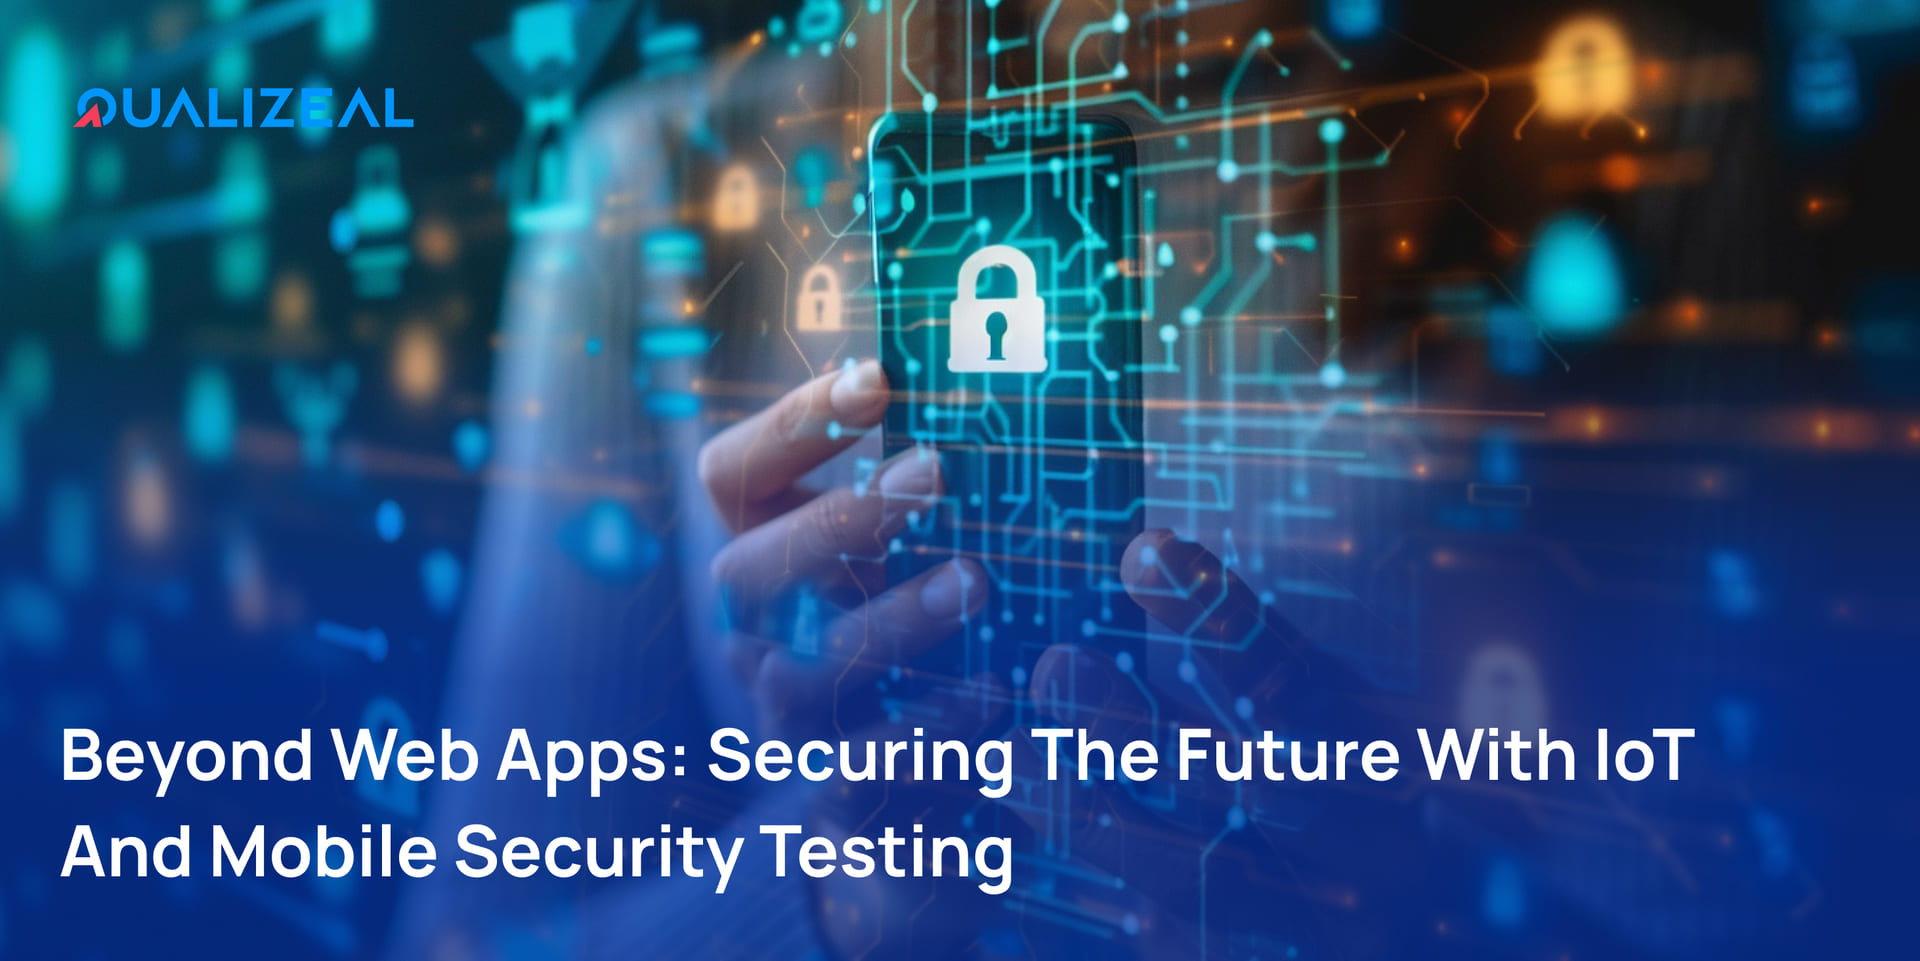 Beyond Web Apps: Securing the Future with IoT and Mobile Security Testing